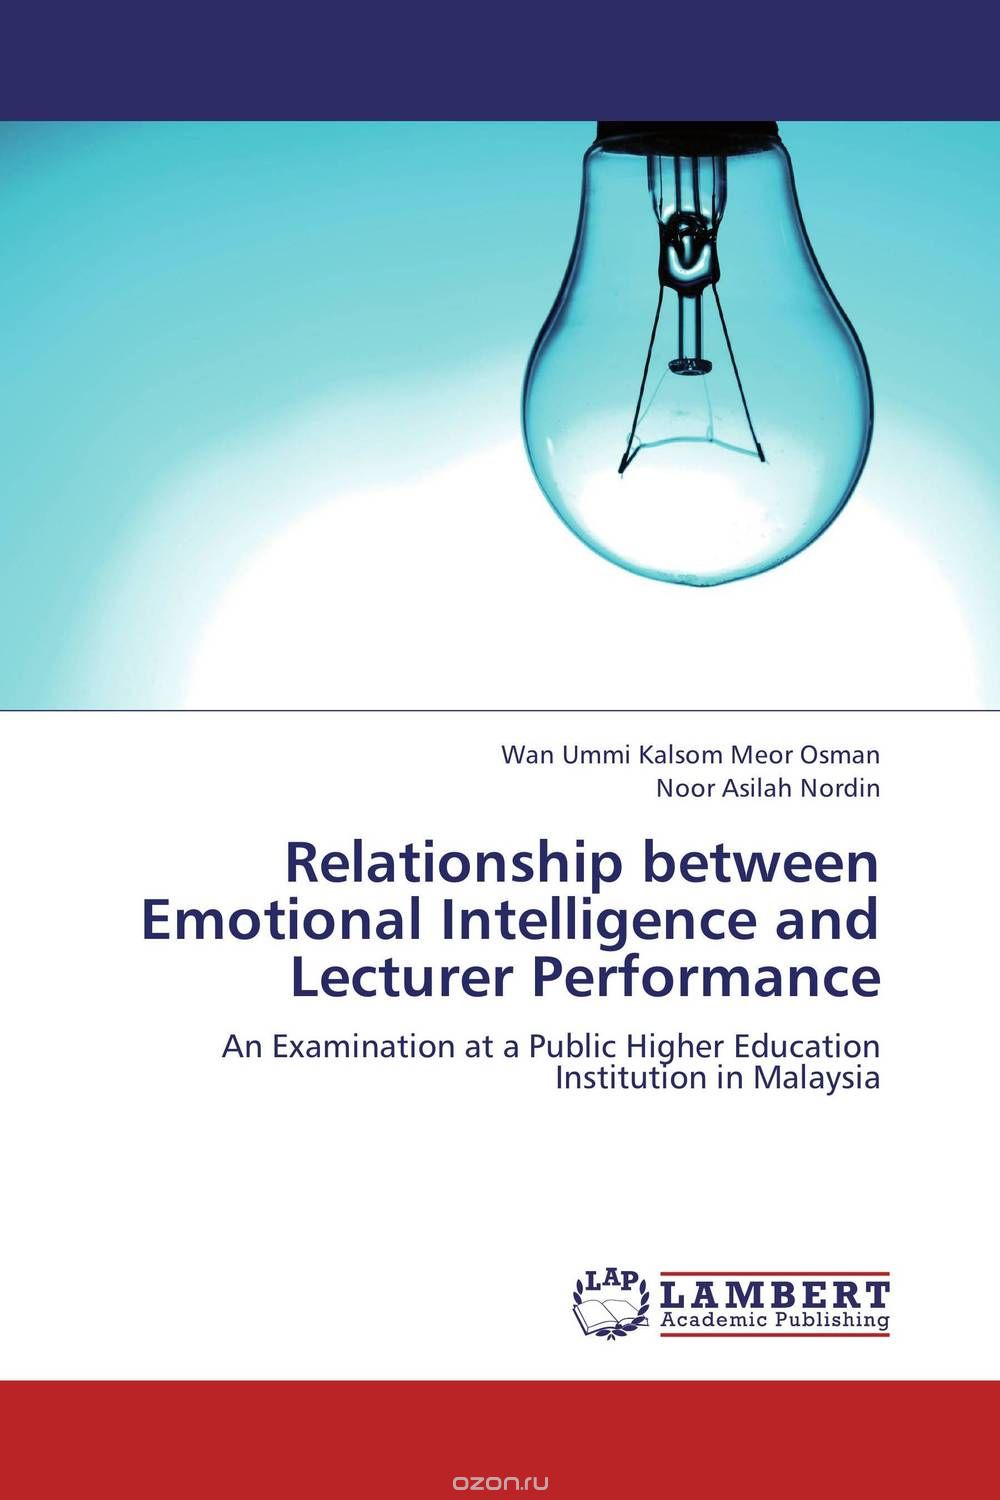 Relationship between Emotional Intelligence and Lecturer Performance